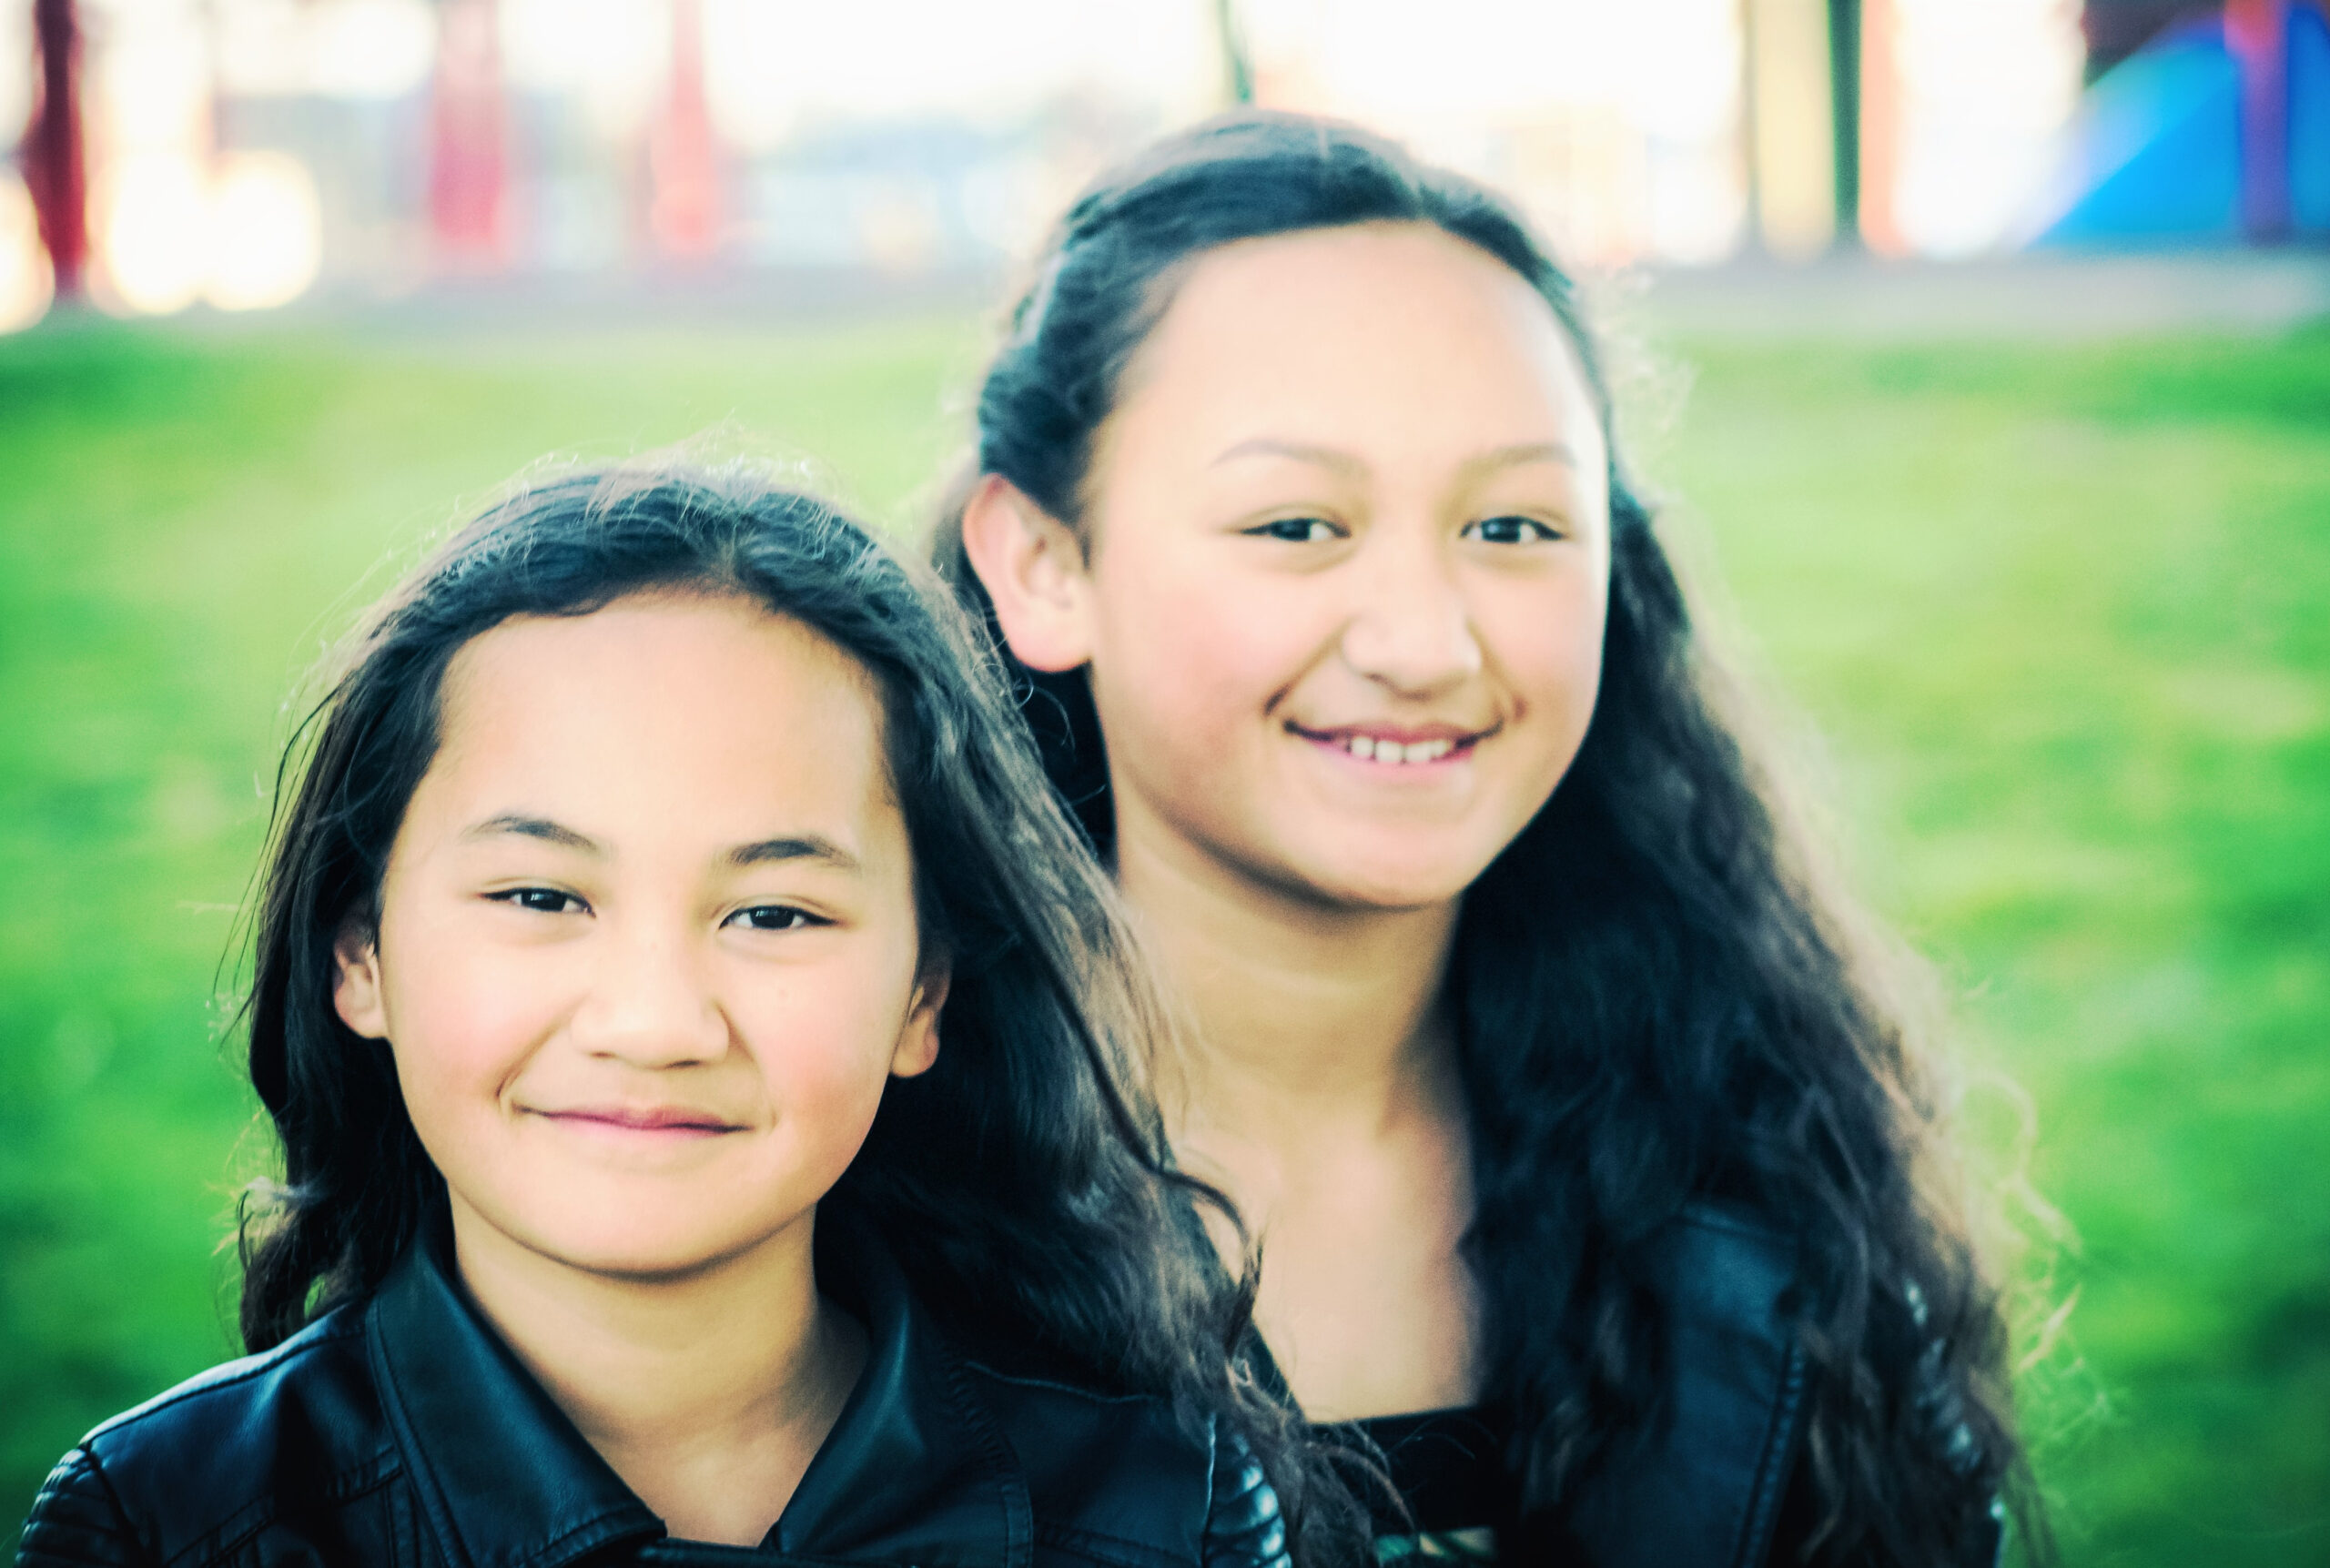 Portrait,Of,Two,Young,Maori,Sisters,Taken,Outdoors,In,A